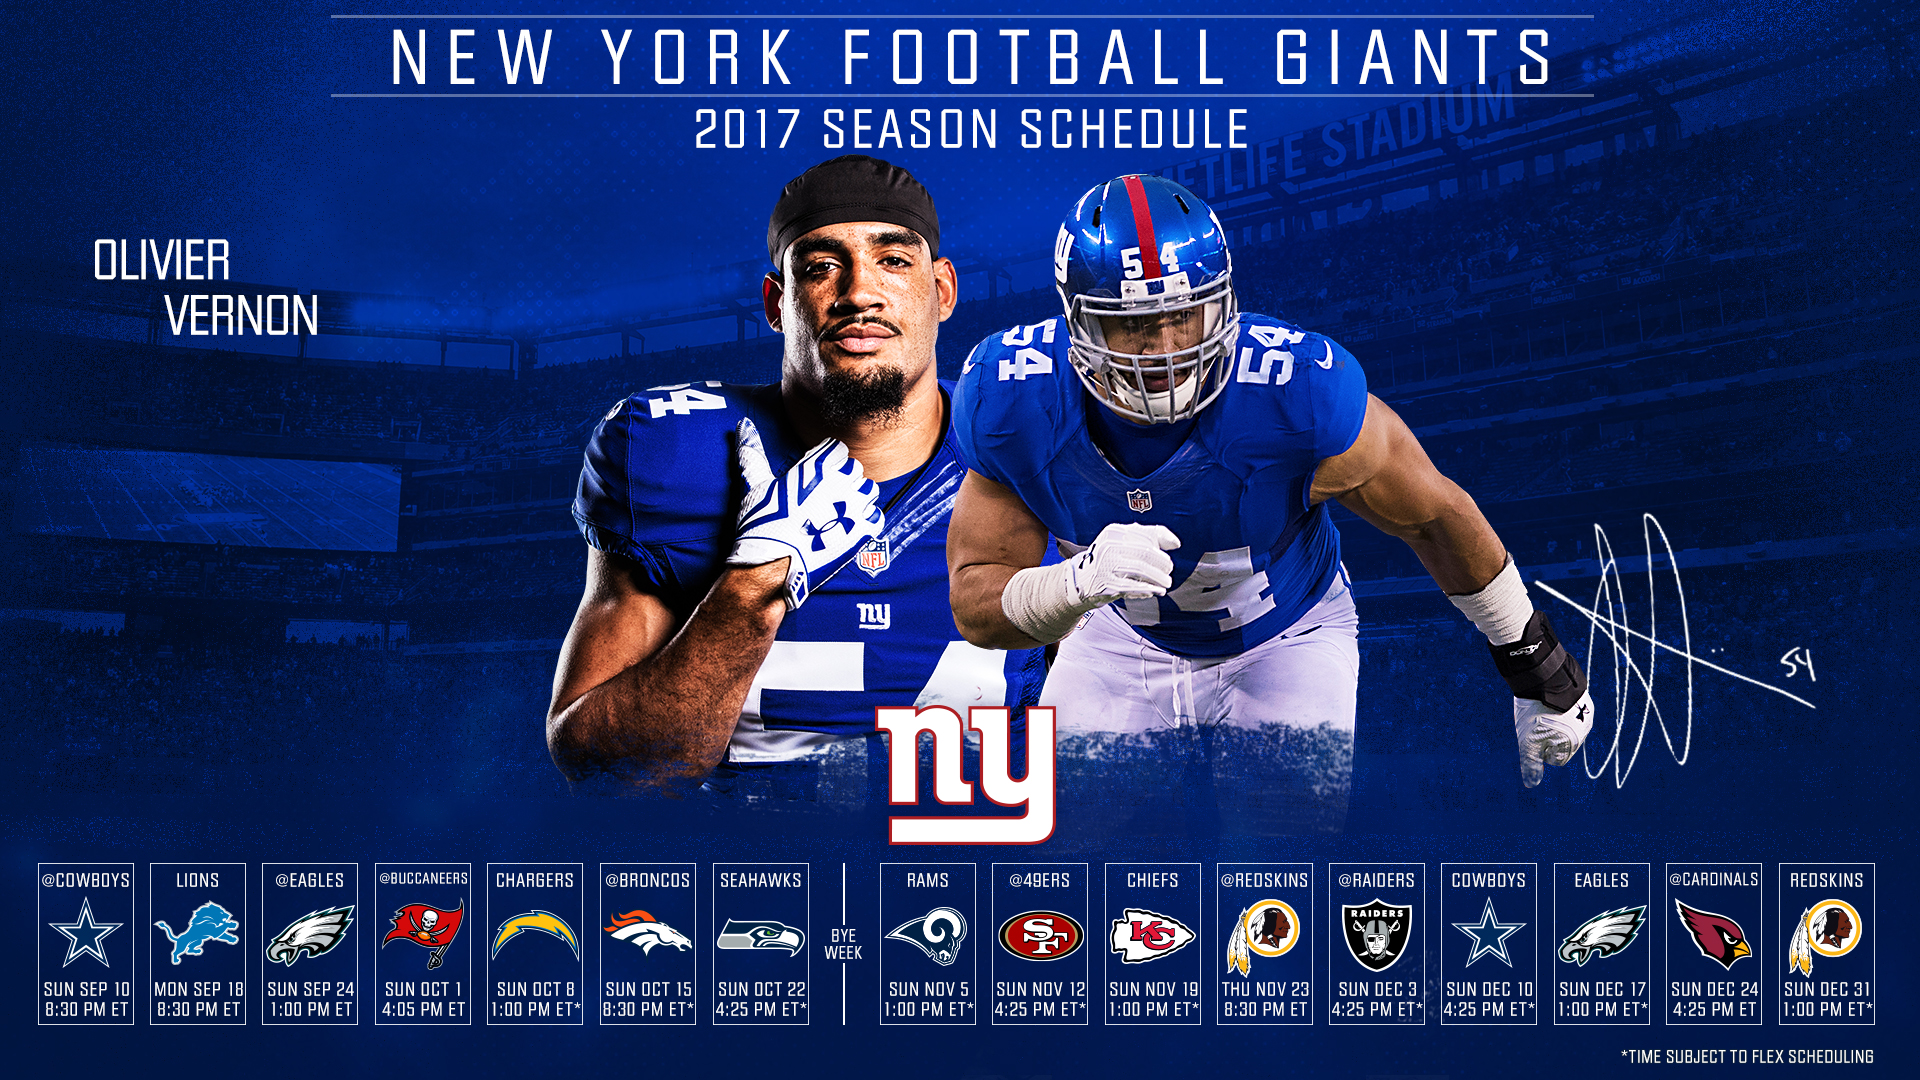 Logos And Uniforms Of The New York Giants - HD Wallpaper 